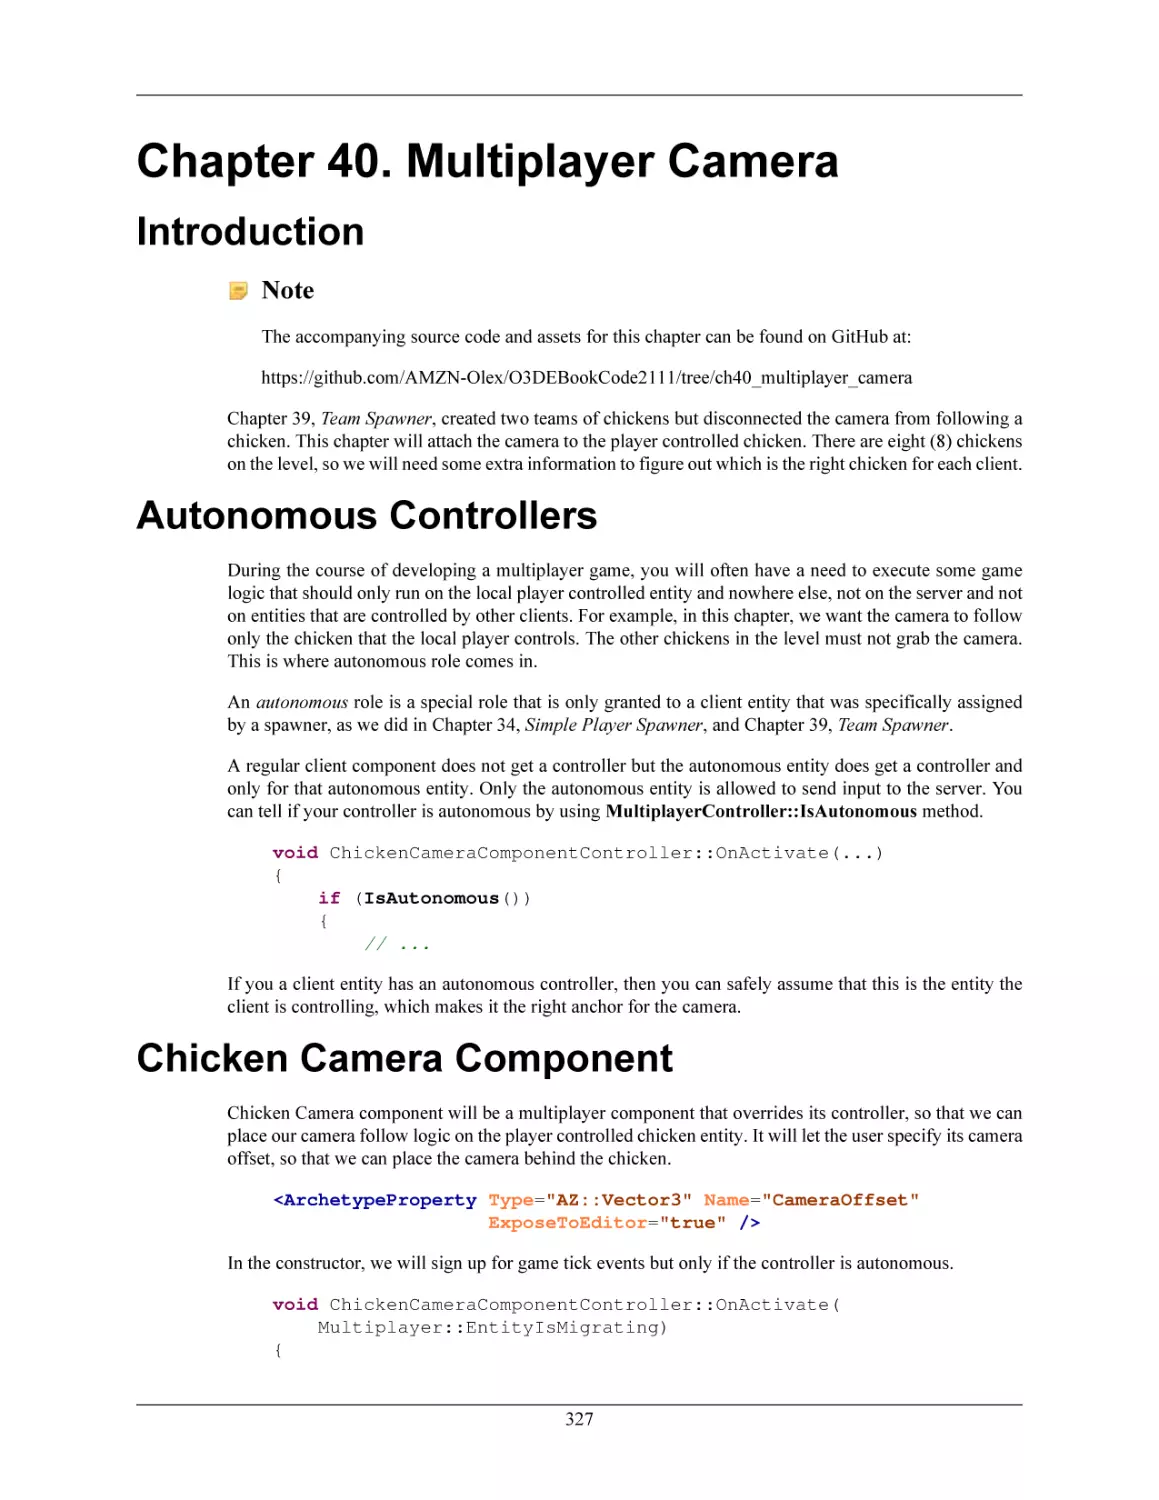 Chapter 40. Multiplayer Camera
Introduction
Autonomous Controllers
Chicken Camera Component